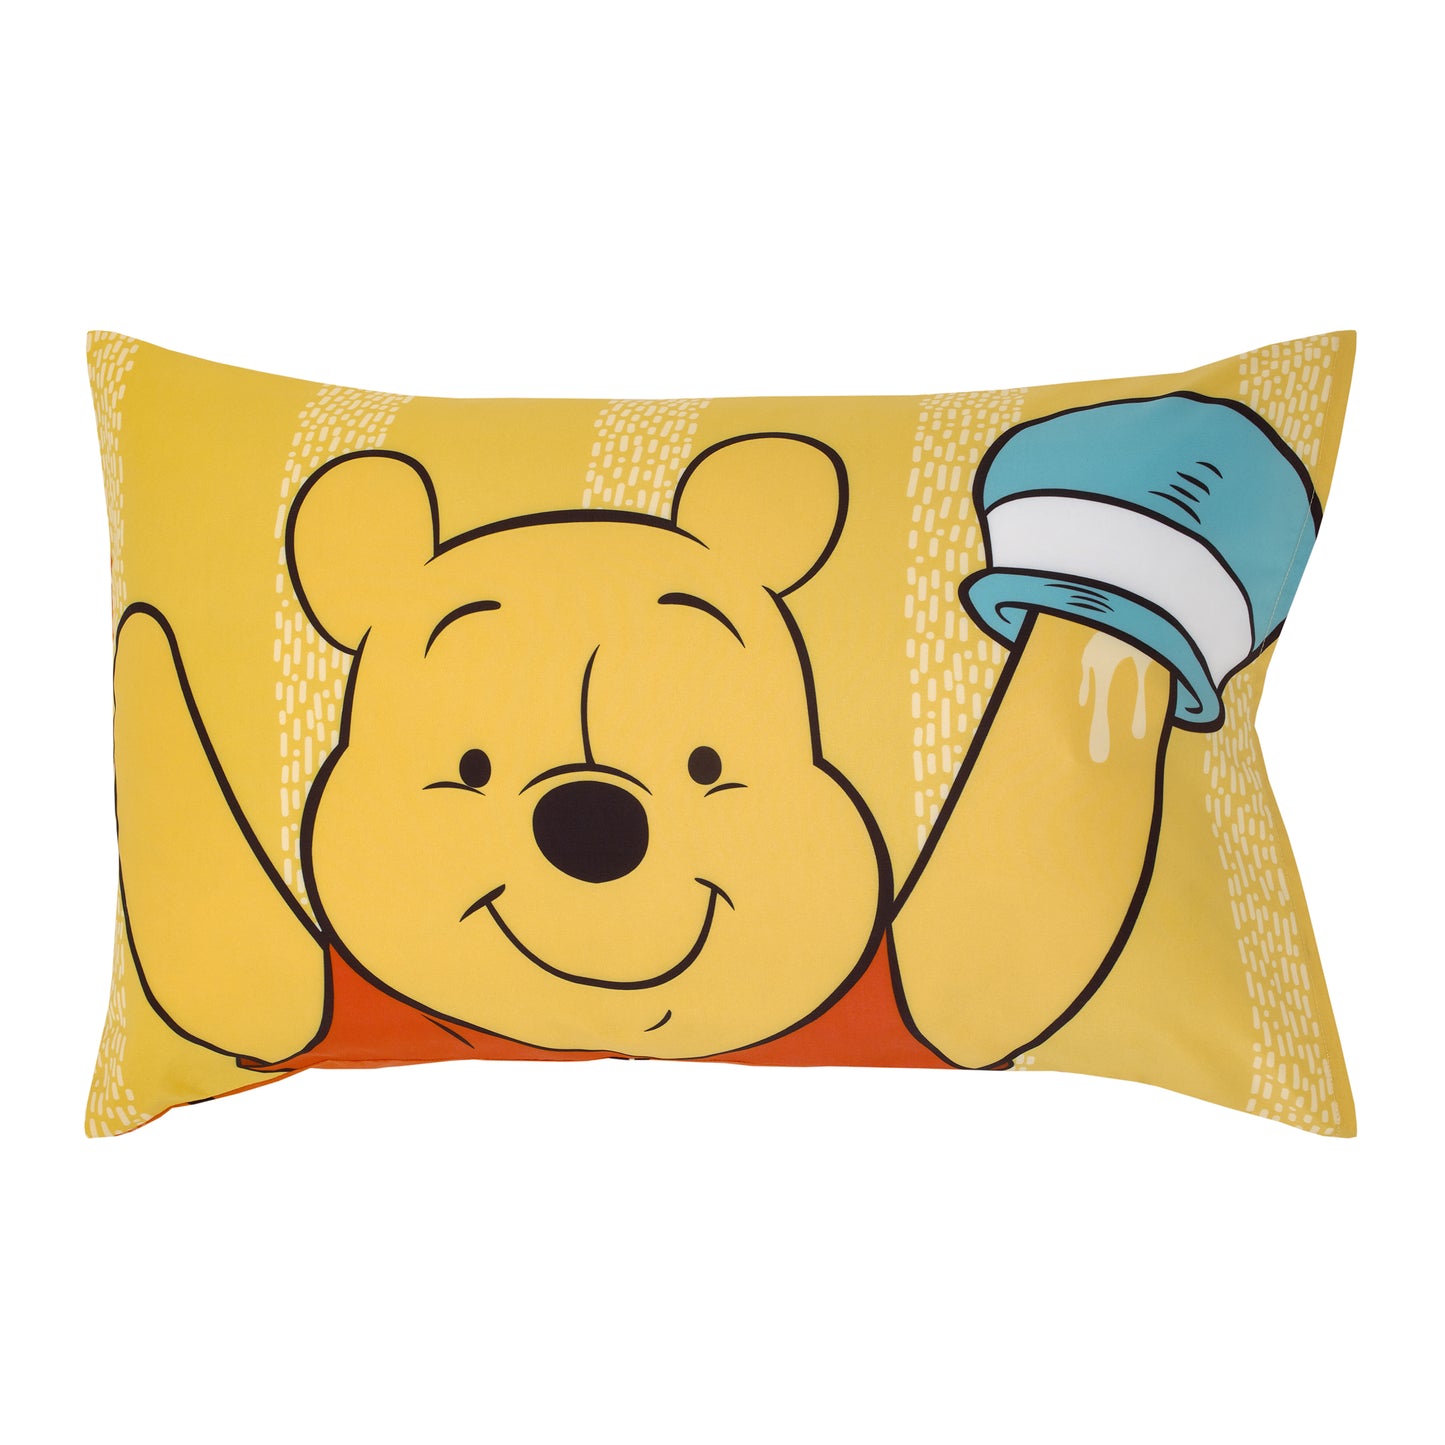 Disney Winnie the Pooh Funny Friends Aqua, Gold, Blue and Orange, Tigger, Eeyore and Piglet 4 Piece Toddler Bed Set - Comforter, Fitted Bottom Sheet, Flat Top Sheet, and Reversible Pillowcase